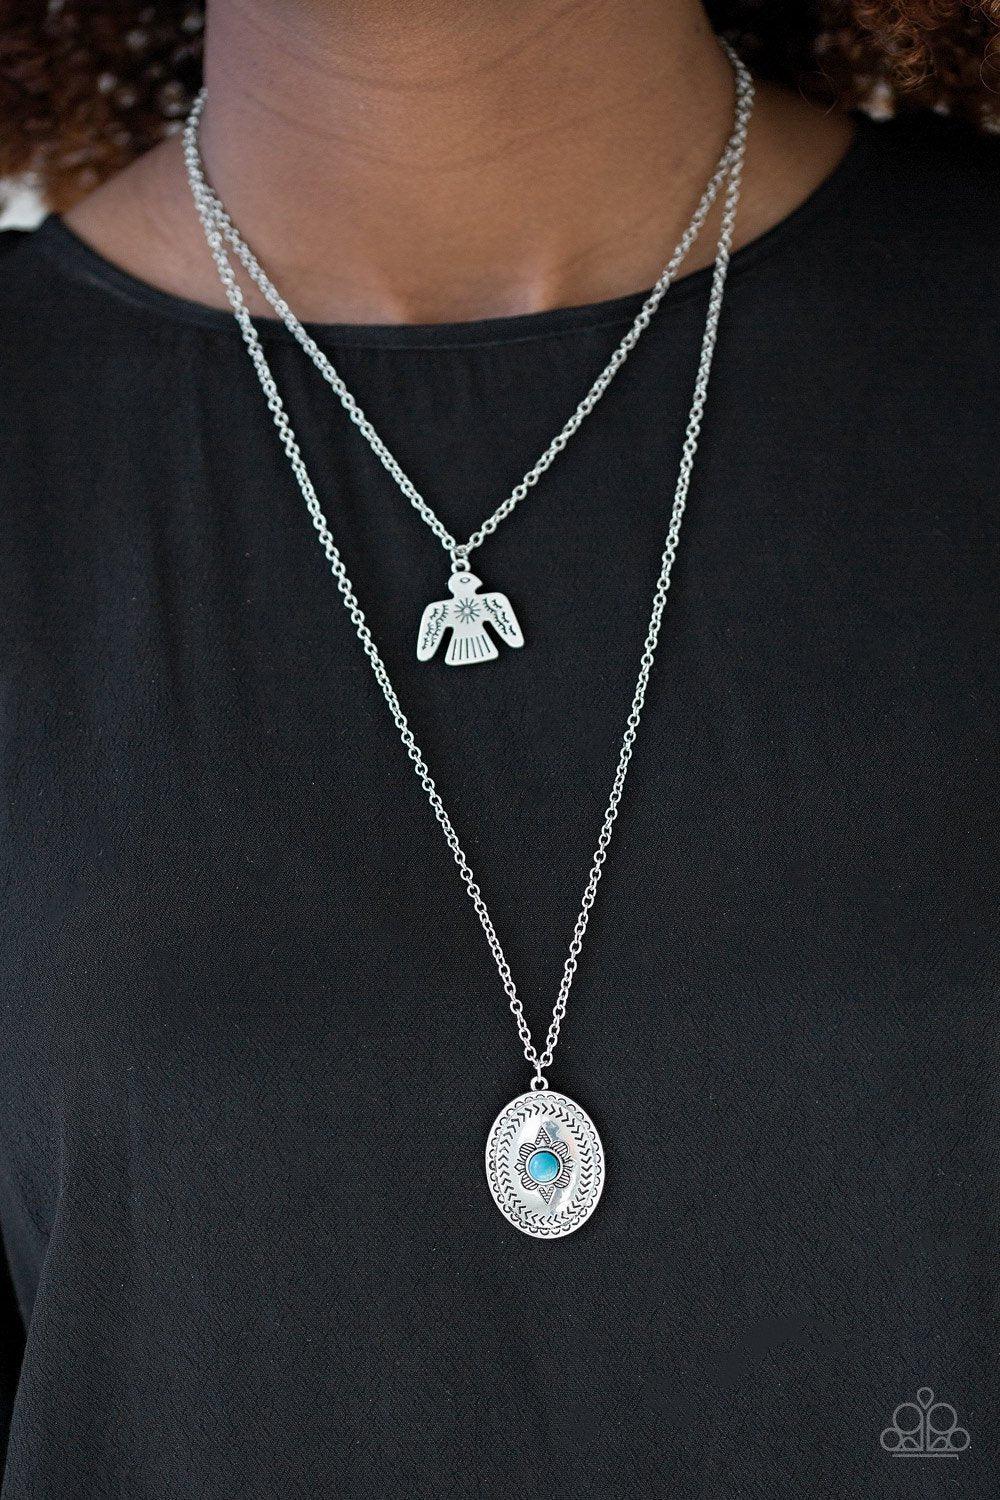 Desert Eagle Silver and Turquoise Blue Stone Necklace - Paparazzi Accessories-CarasShop.com - $5 Jewelry by Cara Jewels